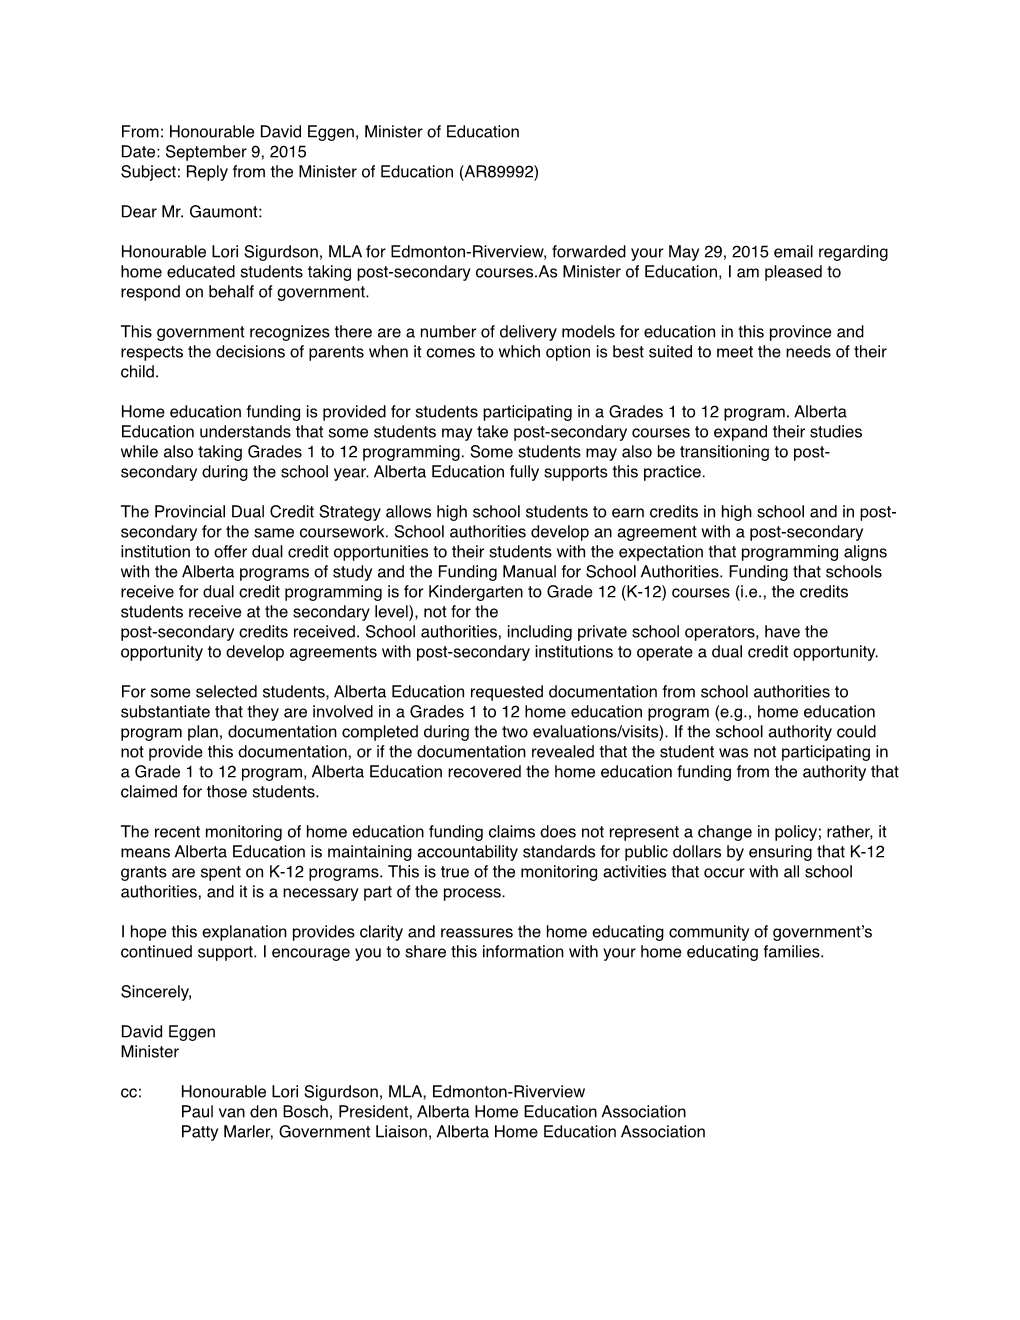 From: Honourable David Eggen, Minister of Education Date: September 9, 2015 Subject: Reply from the Minister of Education (AR89992)